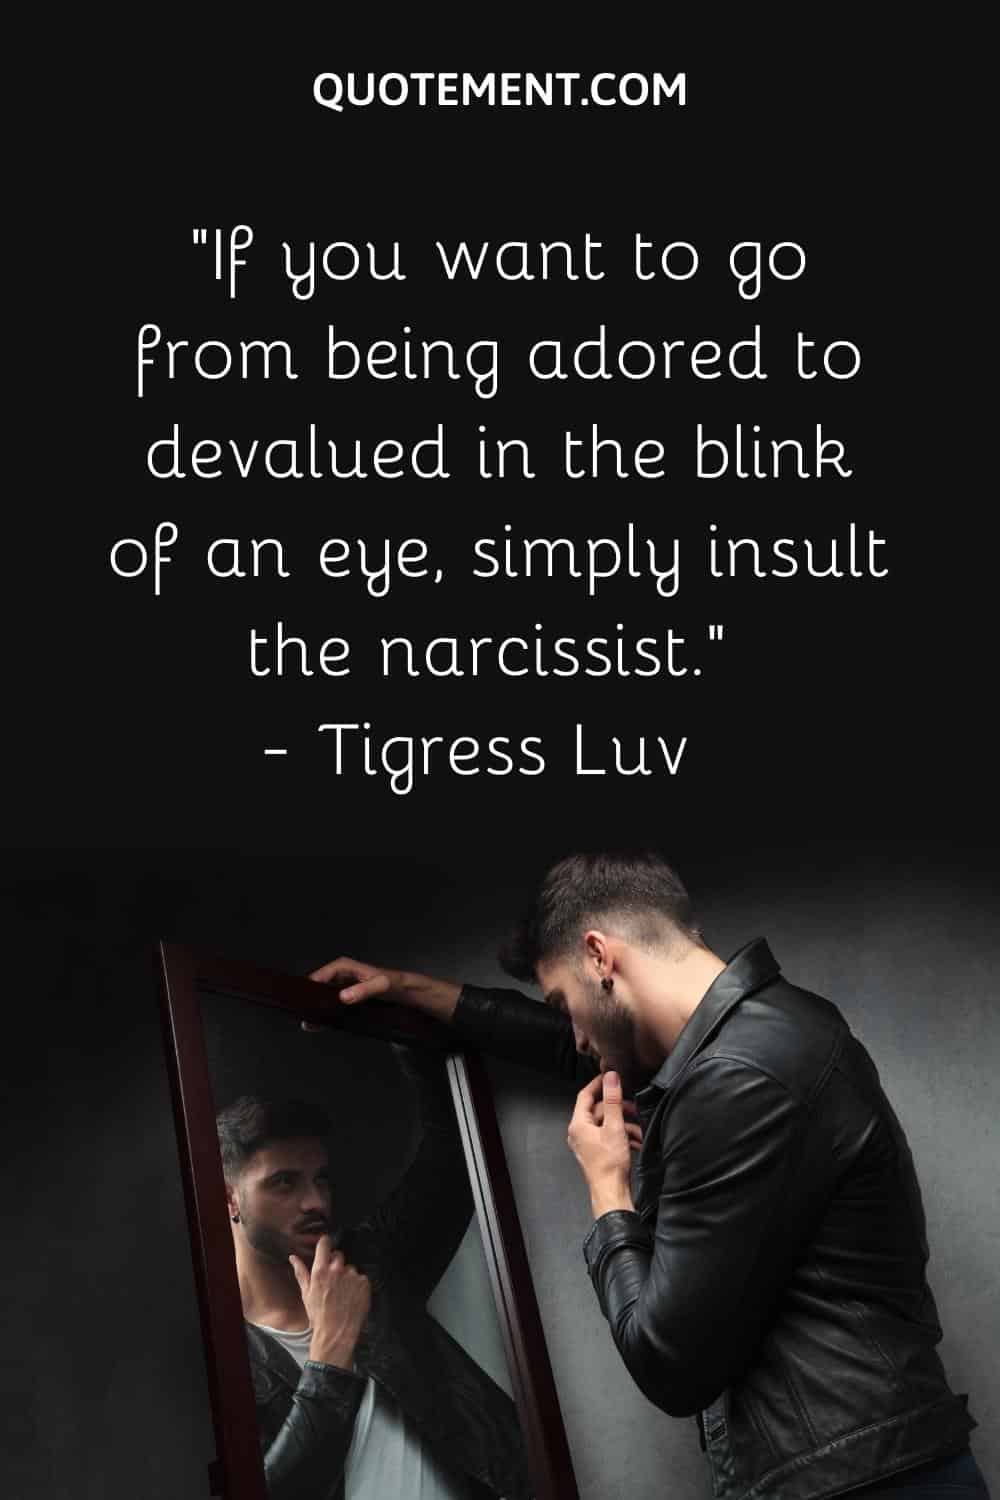 If you want to go from being adored to devalued in the blink of an eye, simply insult the narcissist